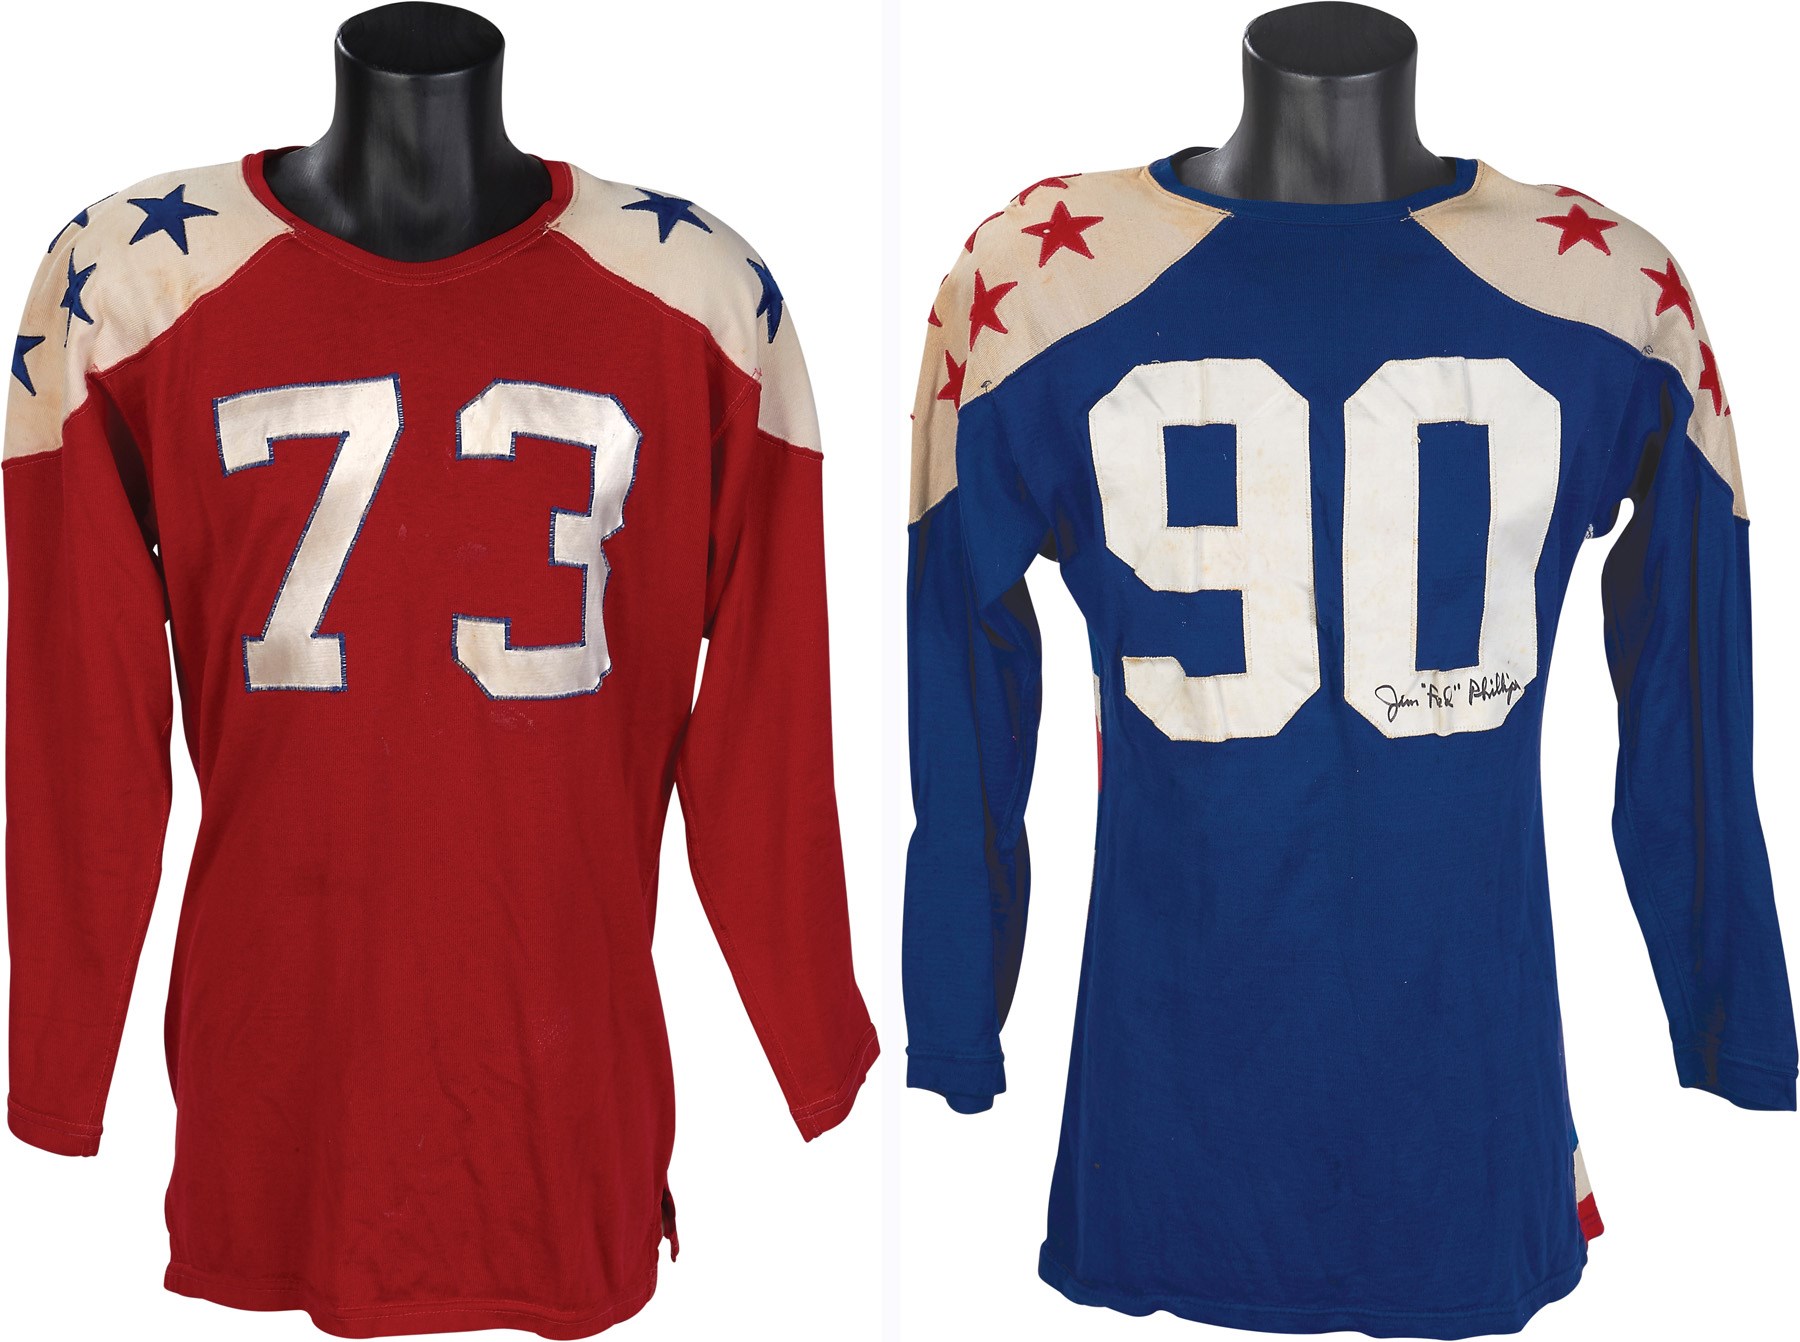 - 1950s Jimmy "Red" Phillips College All-Star Game Worn Jerseys (Photo Documentation)